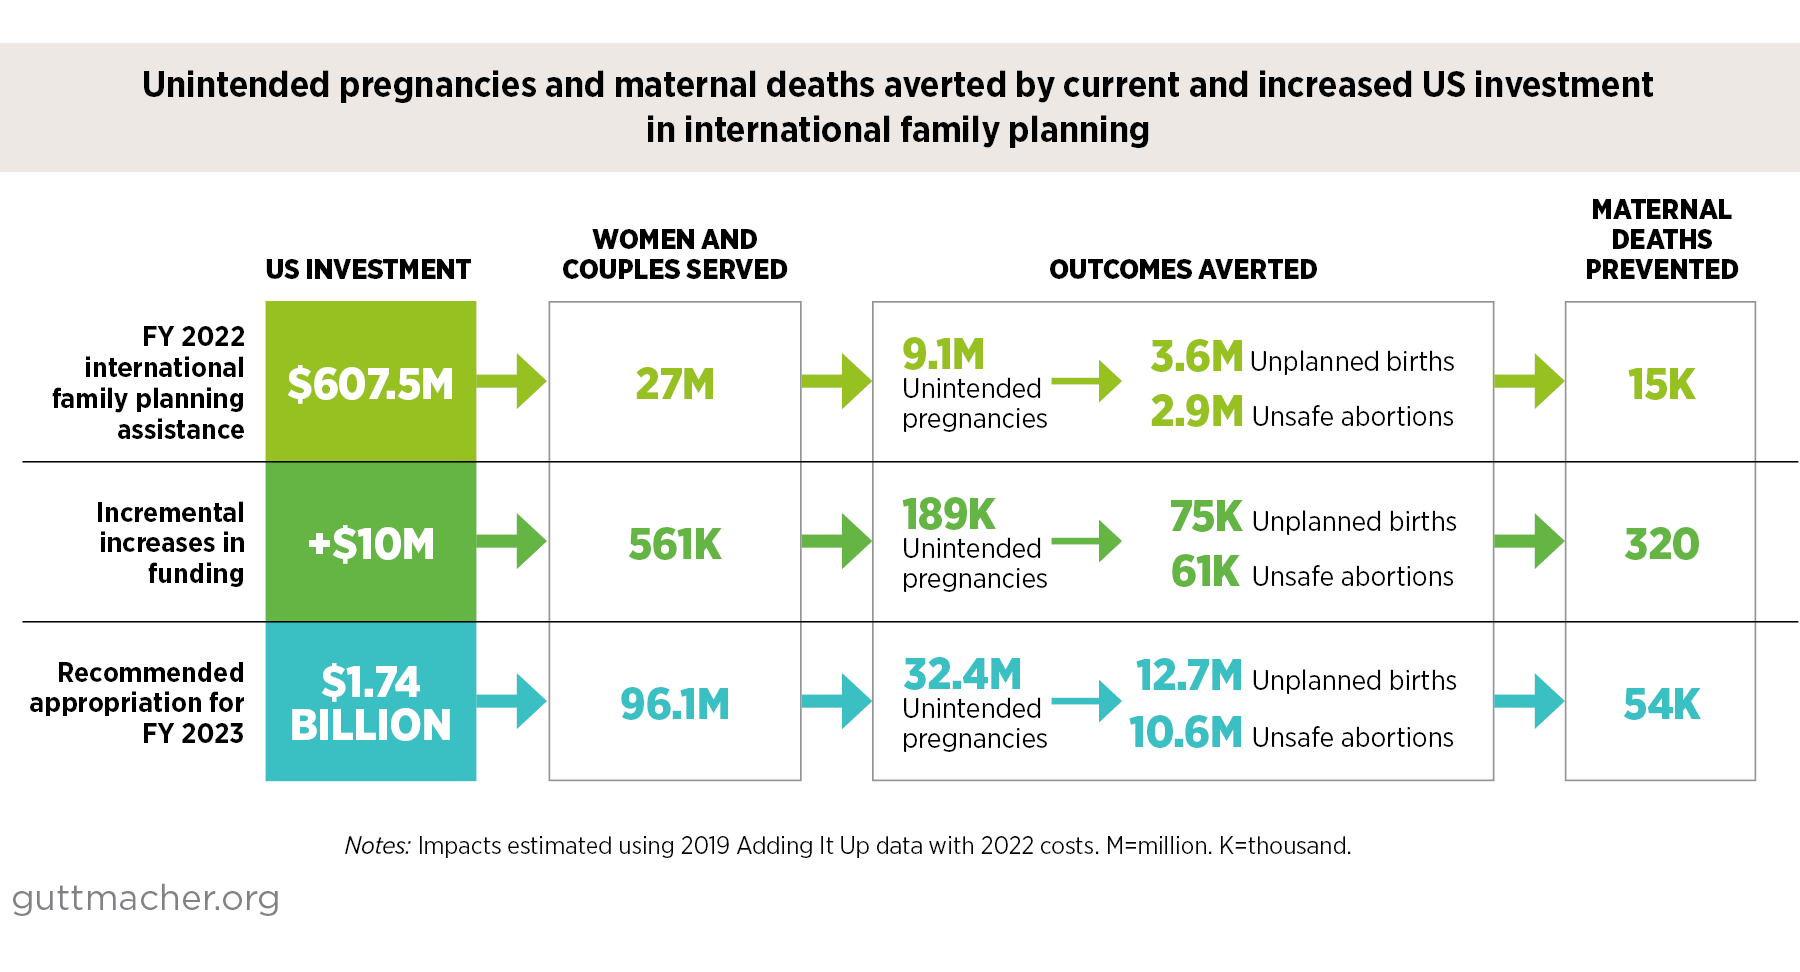 Unintended pregnancies and maternal deaths averted by current and increased US investment in international family planning